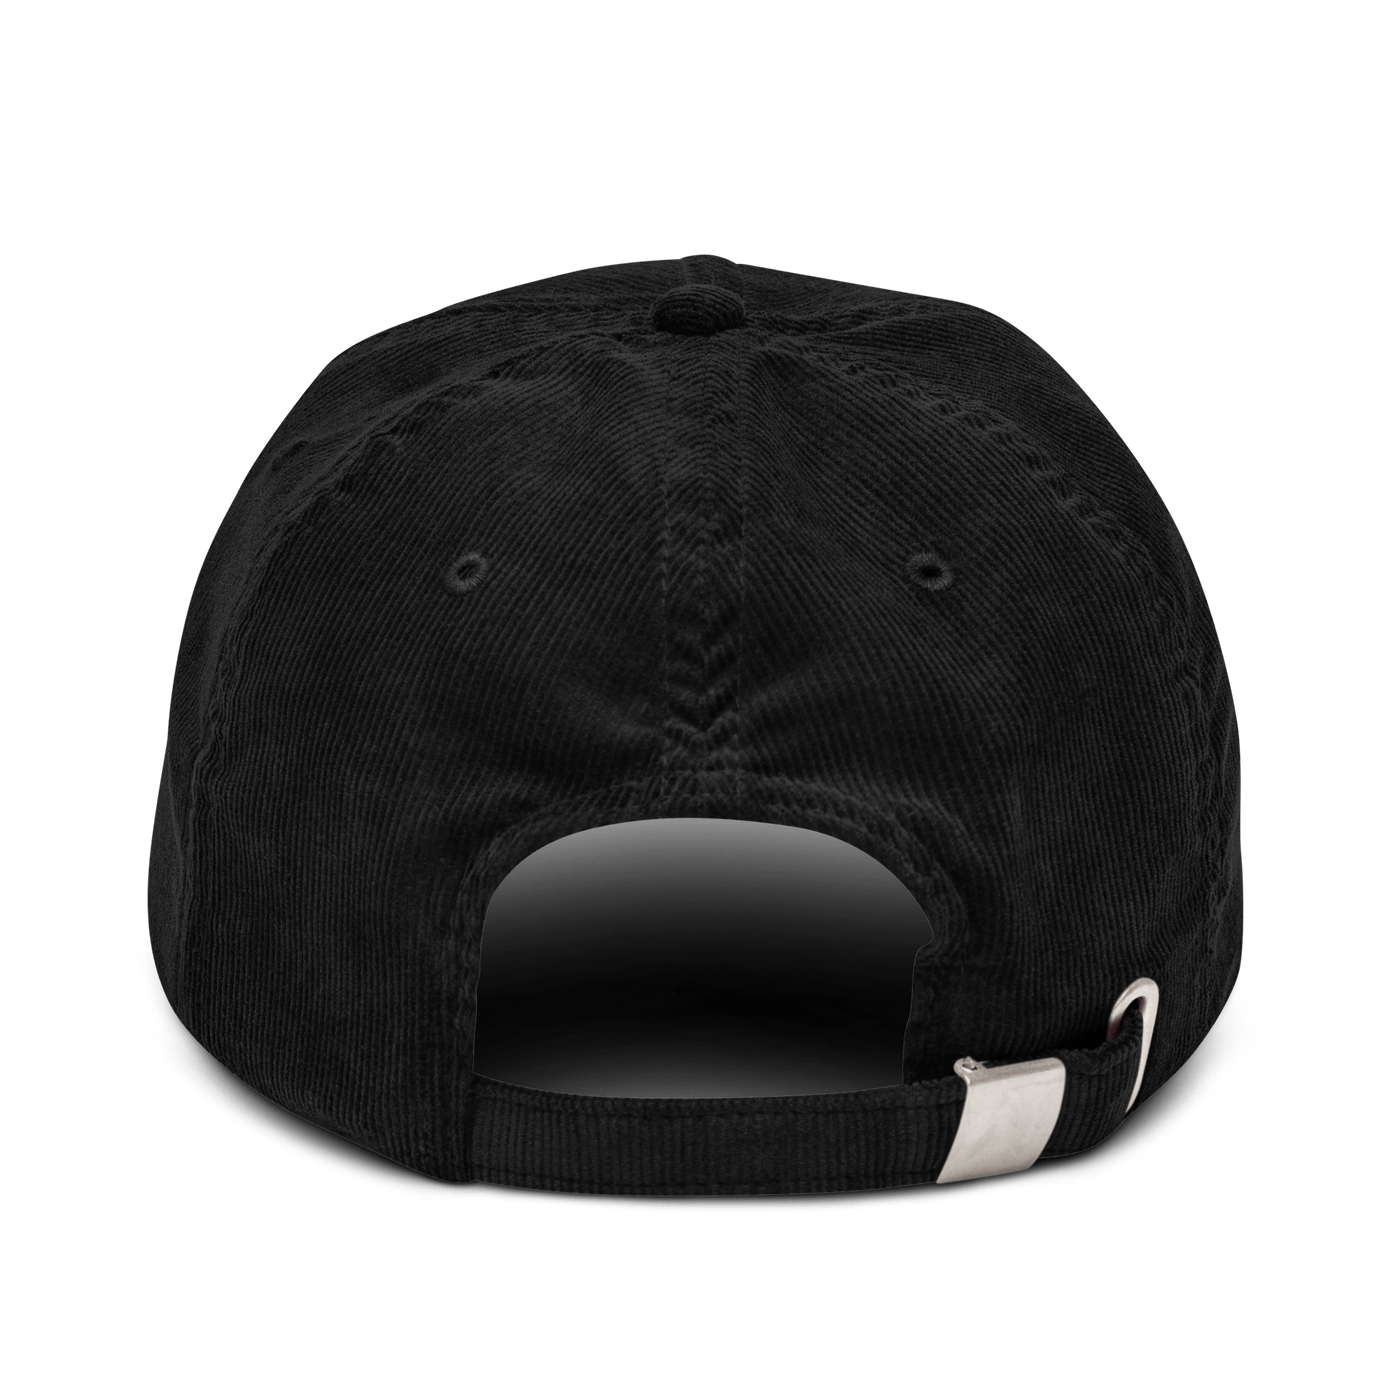 I survived a pandemic Corduroy hat - Black - - Just Another Cap Store